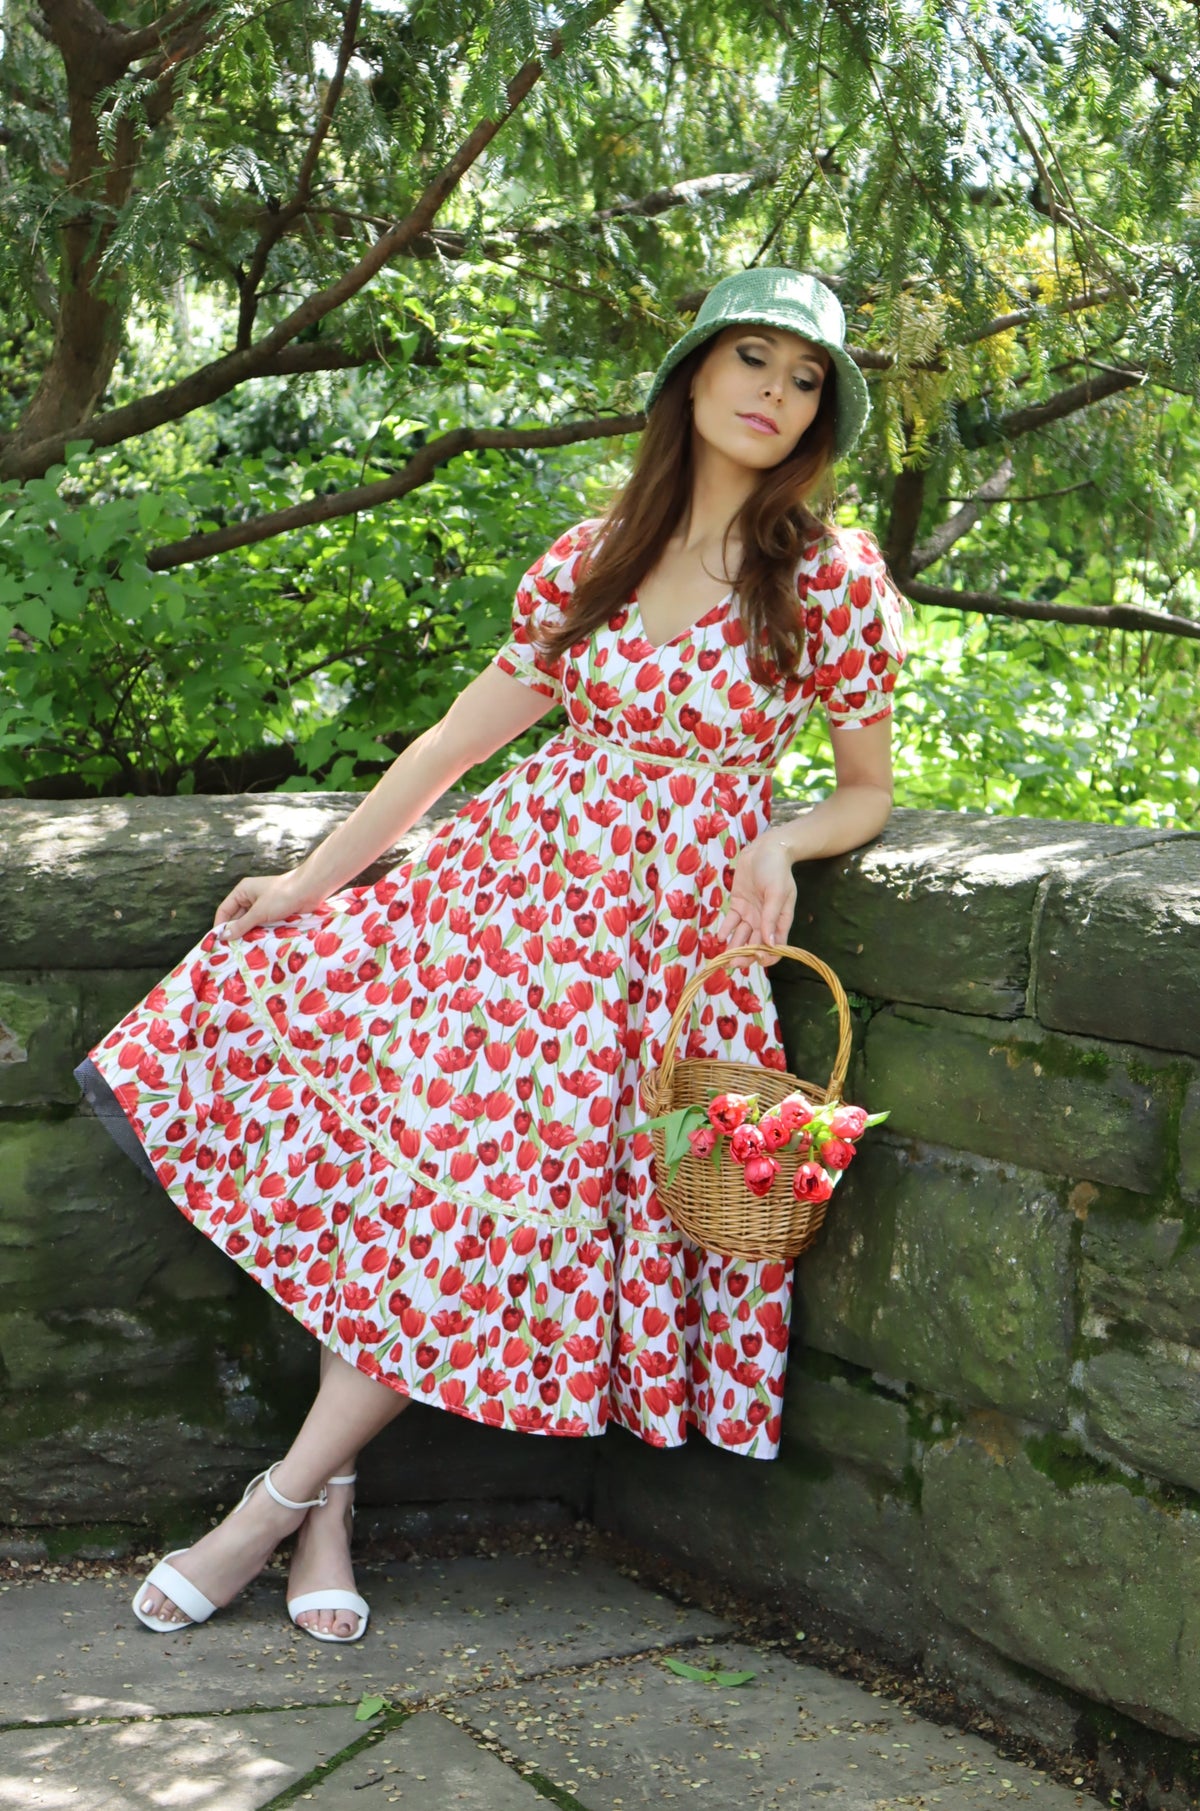 Model wearing midi length dress with a tulip print on white and wearing a green hat and holding a basket of tulips with her eyes downward.